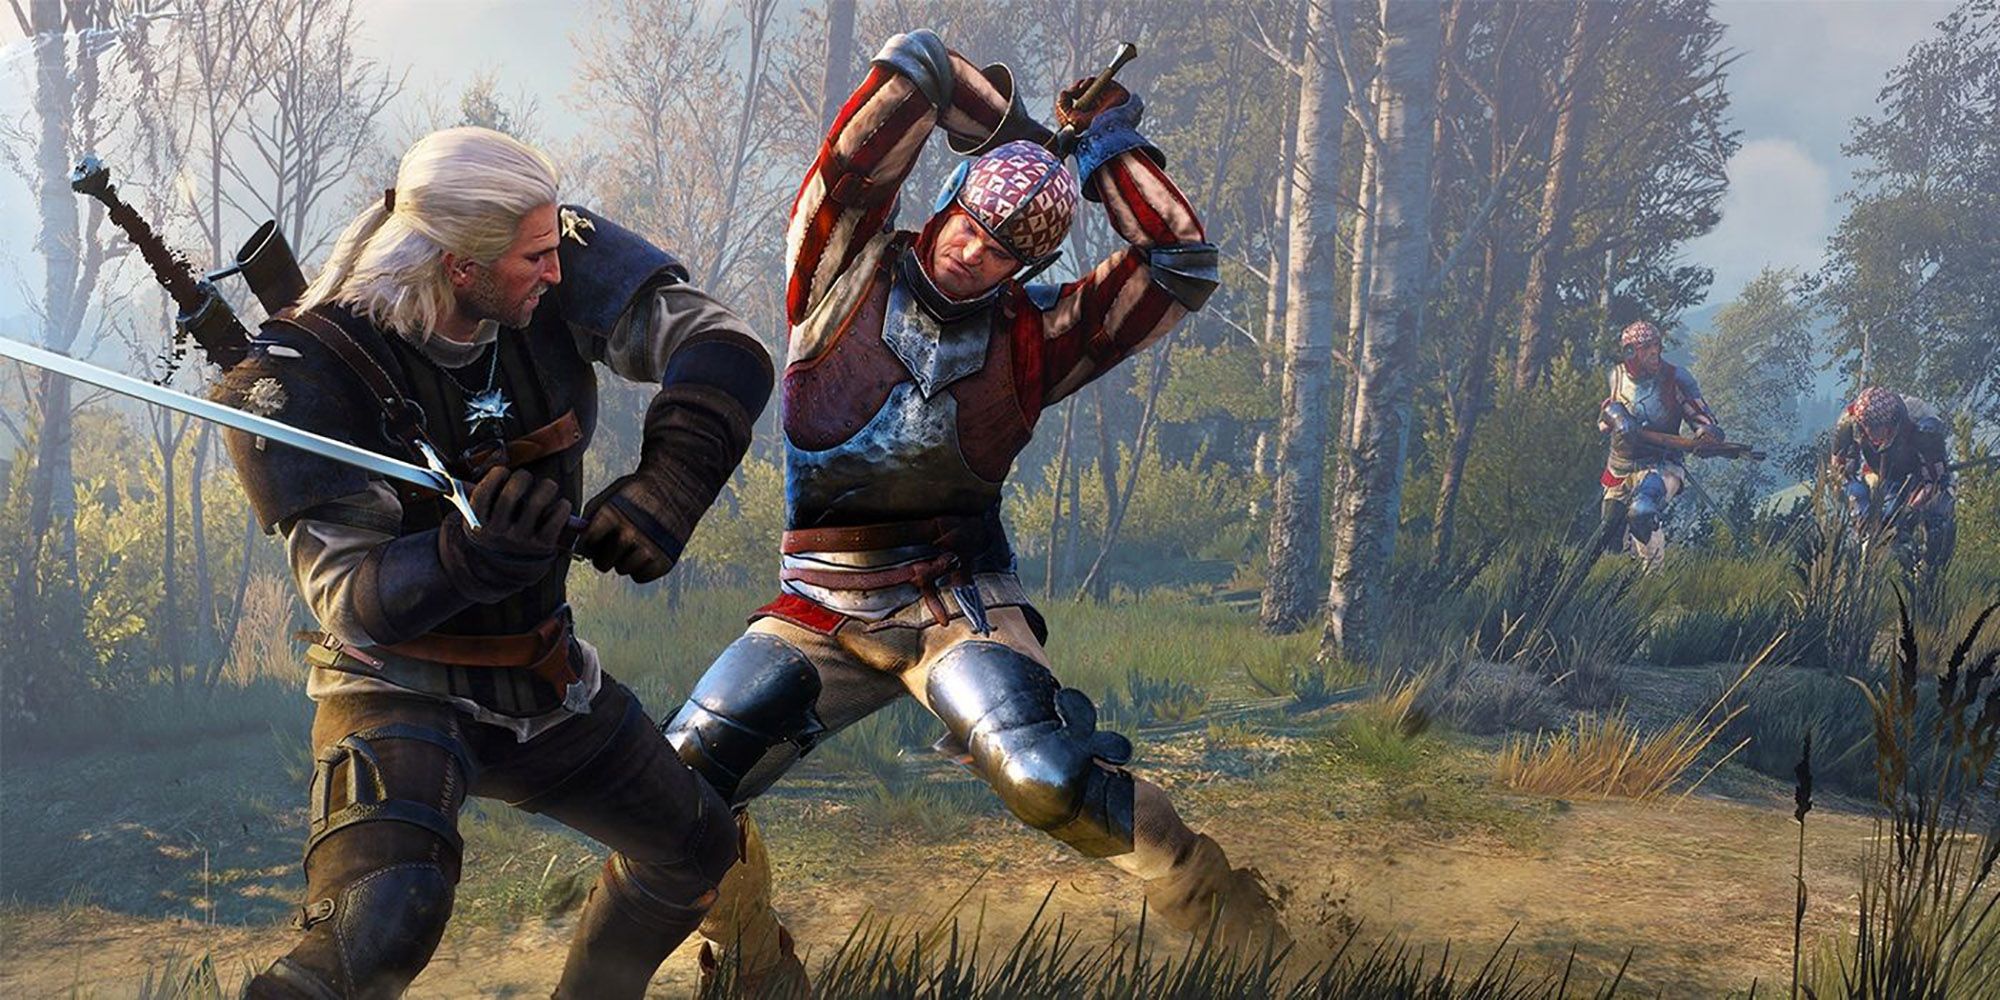 Witcher 3 - Promotional Render Of Geralt Using Whirl To Fight A Guard